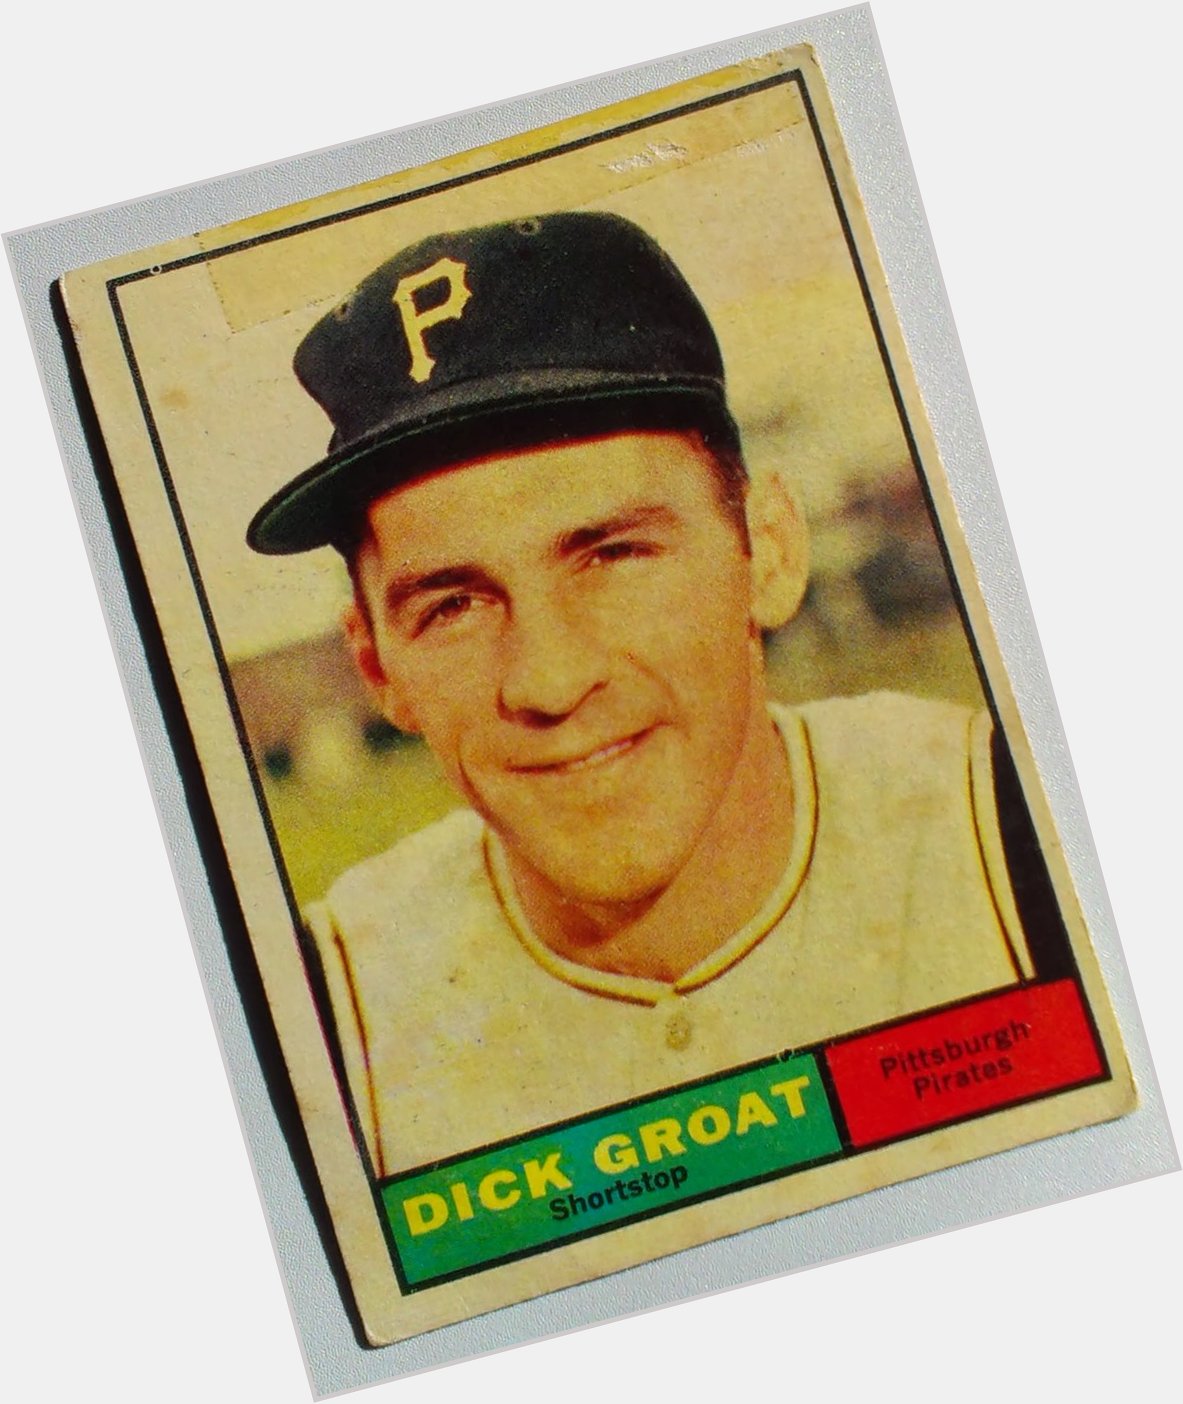 Happy 88th Birthday Dick Groat - a member of the Topps club  